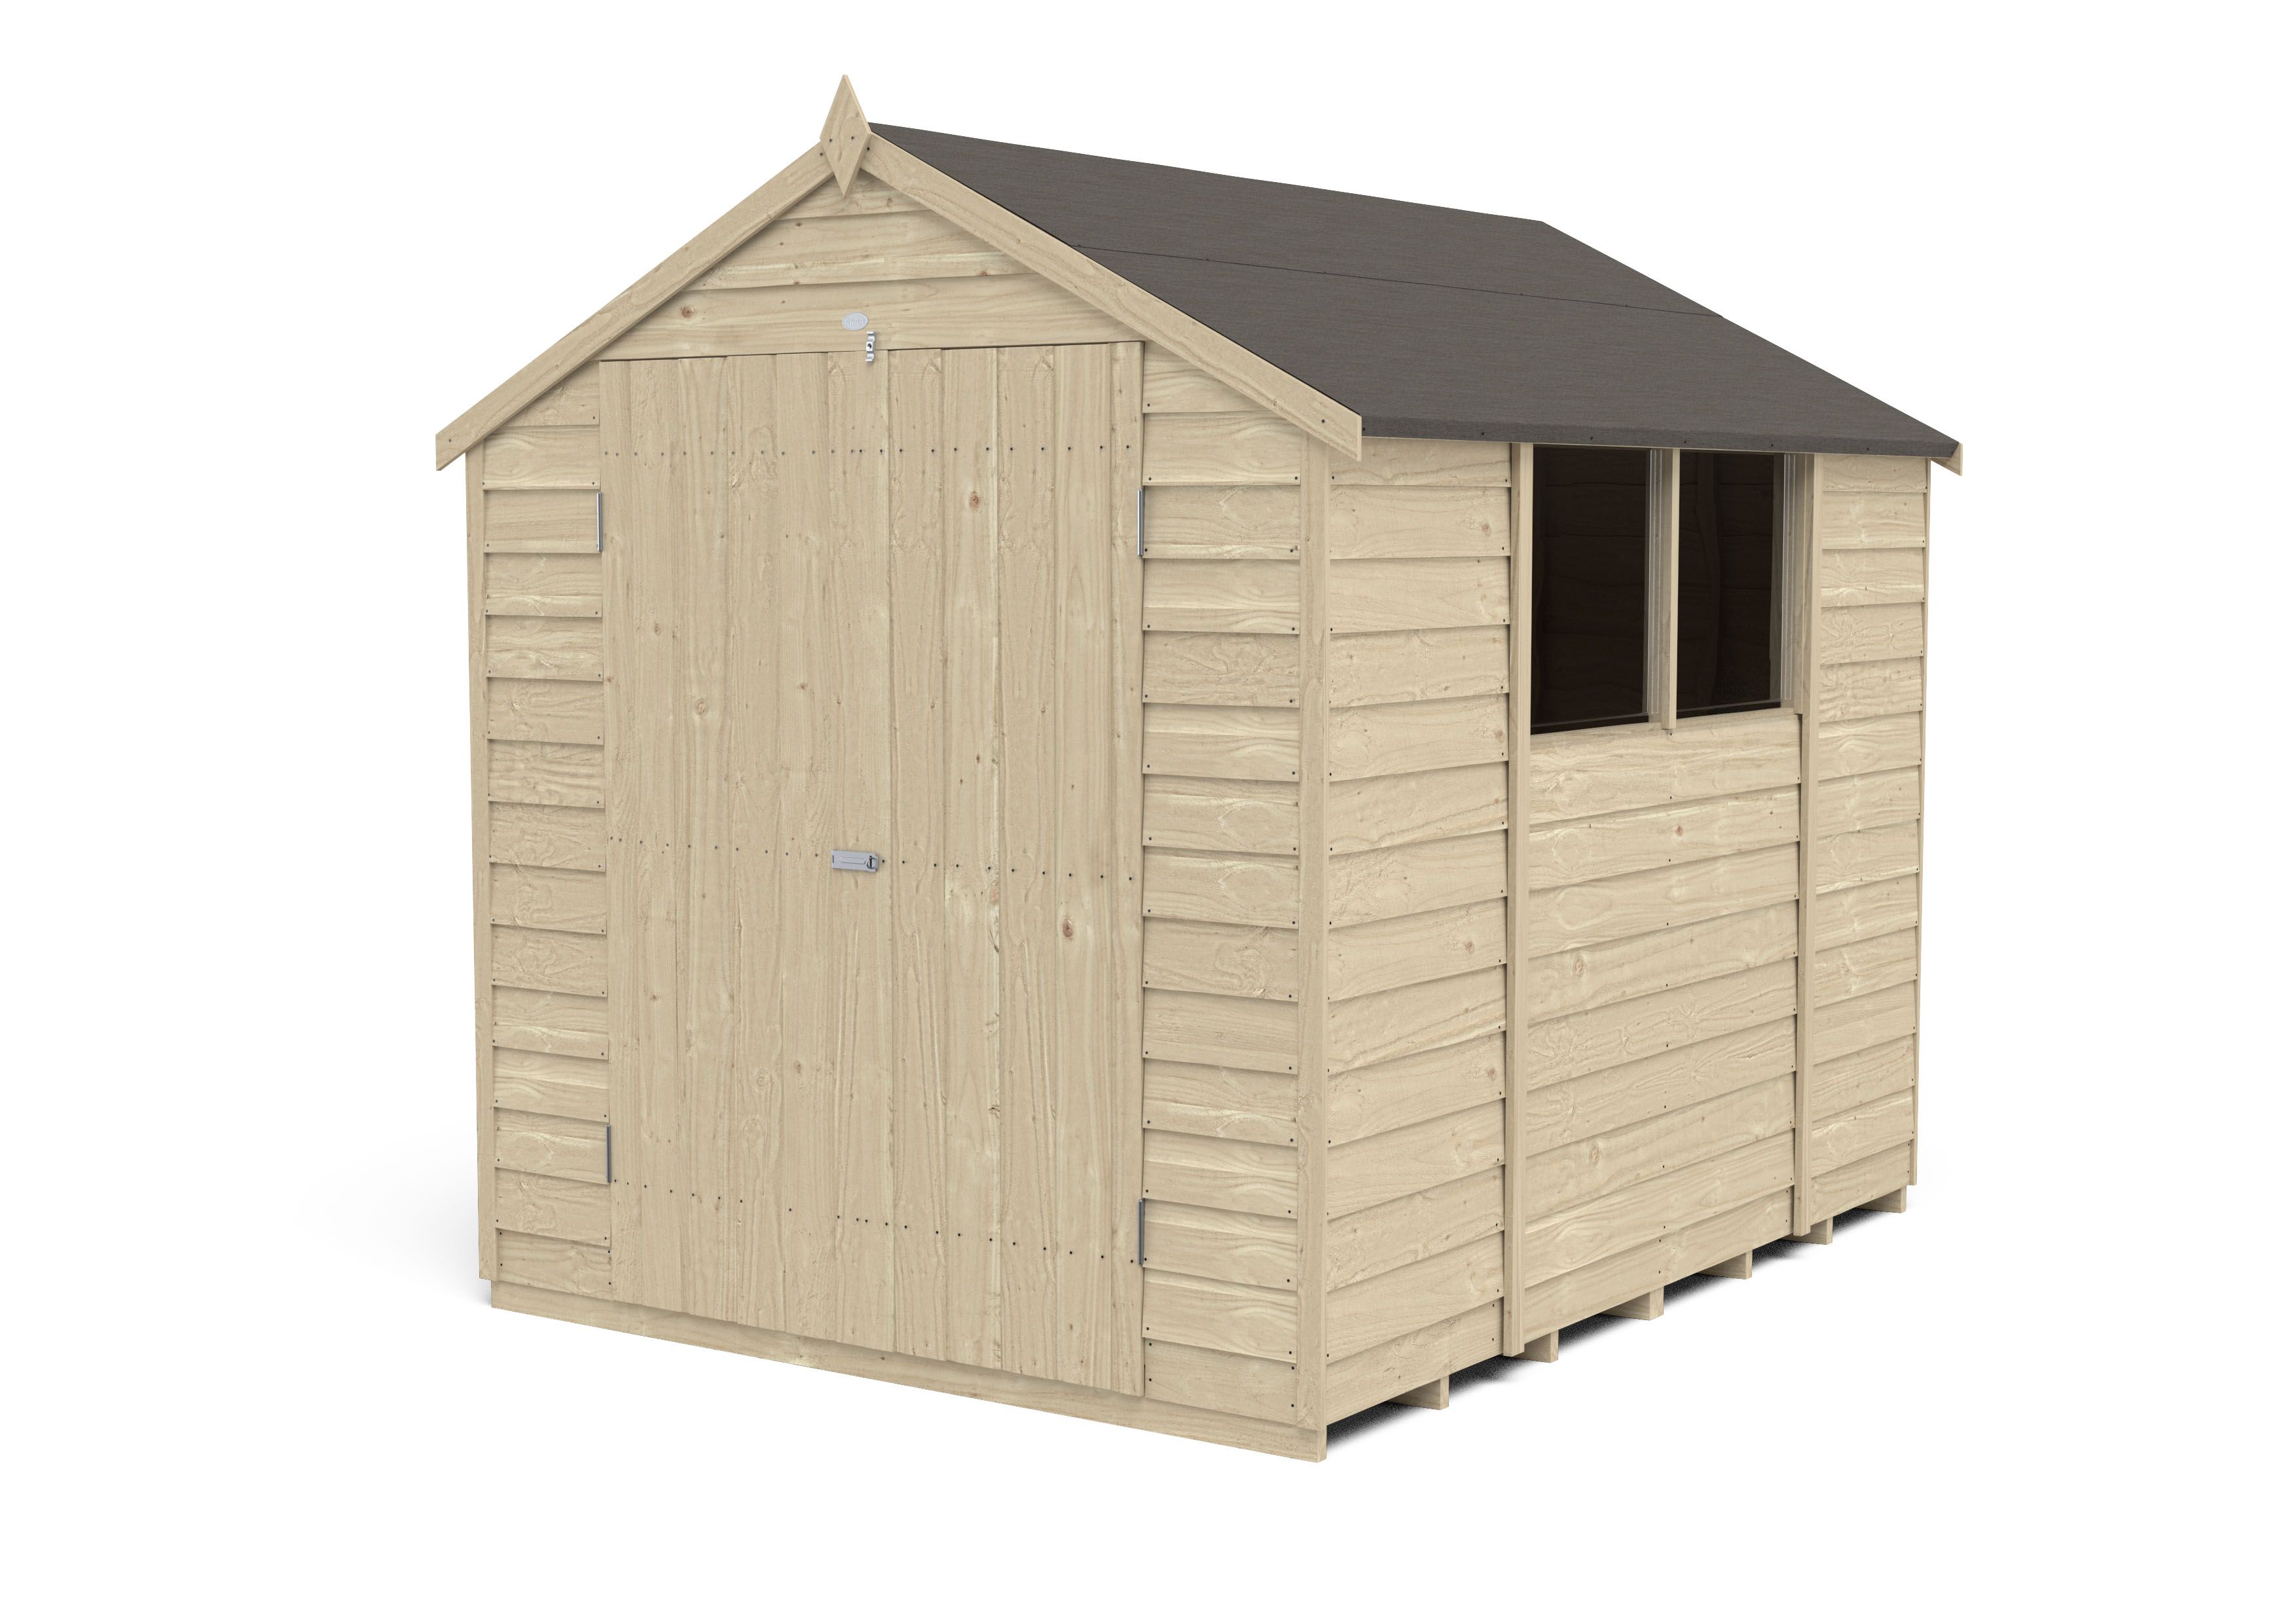 Forest Garden Overlap 8x6 ft Apex Wooden Pressure treated 2 door Shed with floor & 2 windows (Base included) - Assembly service included